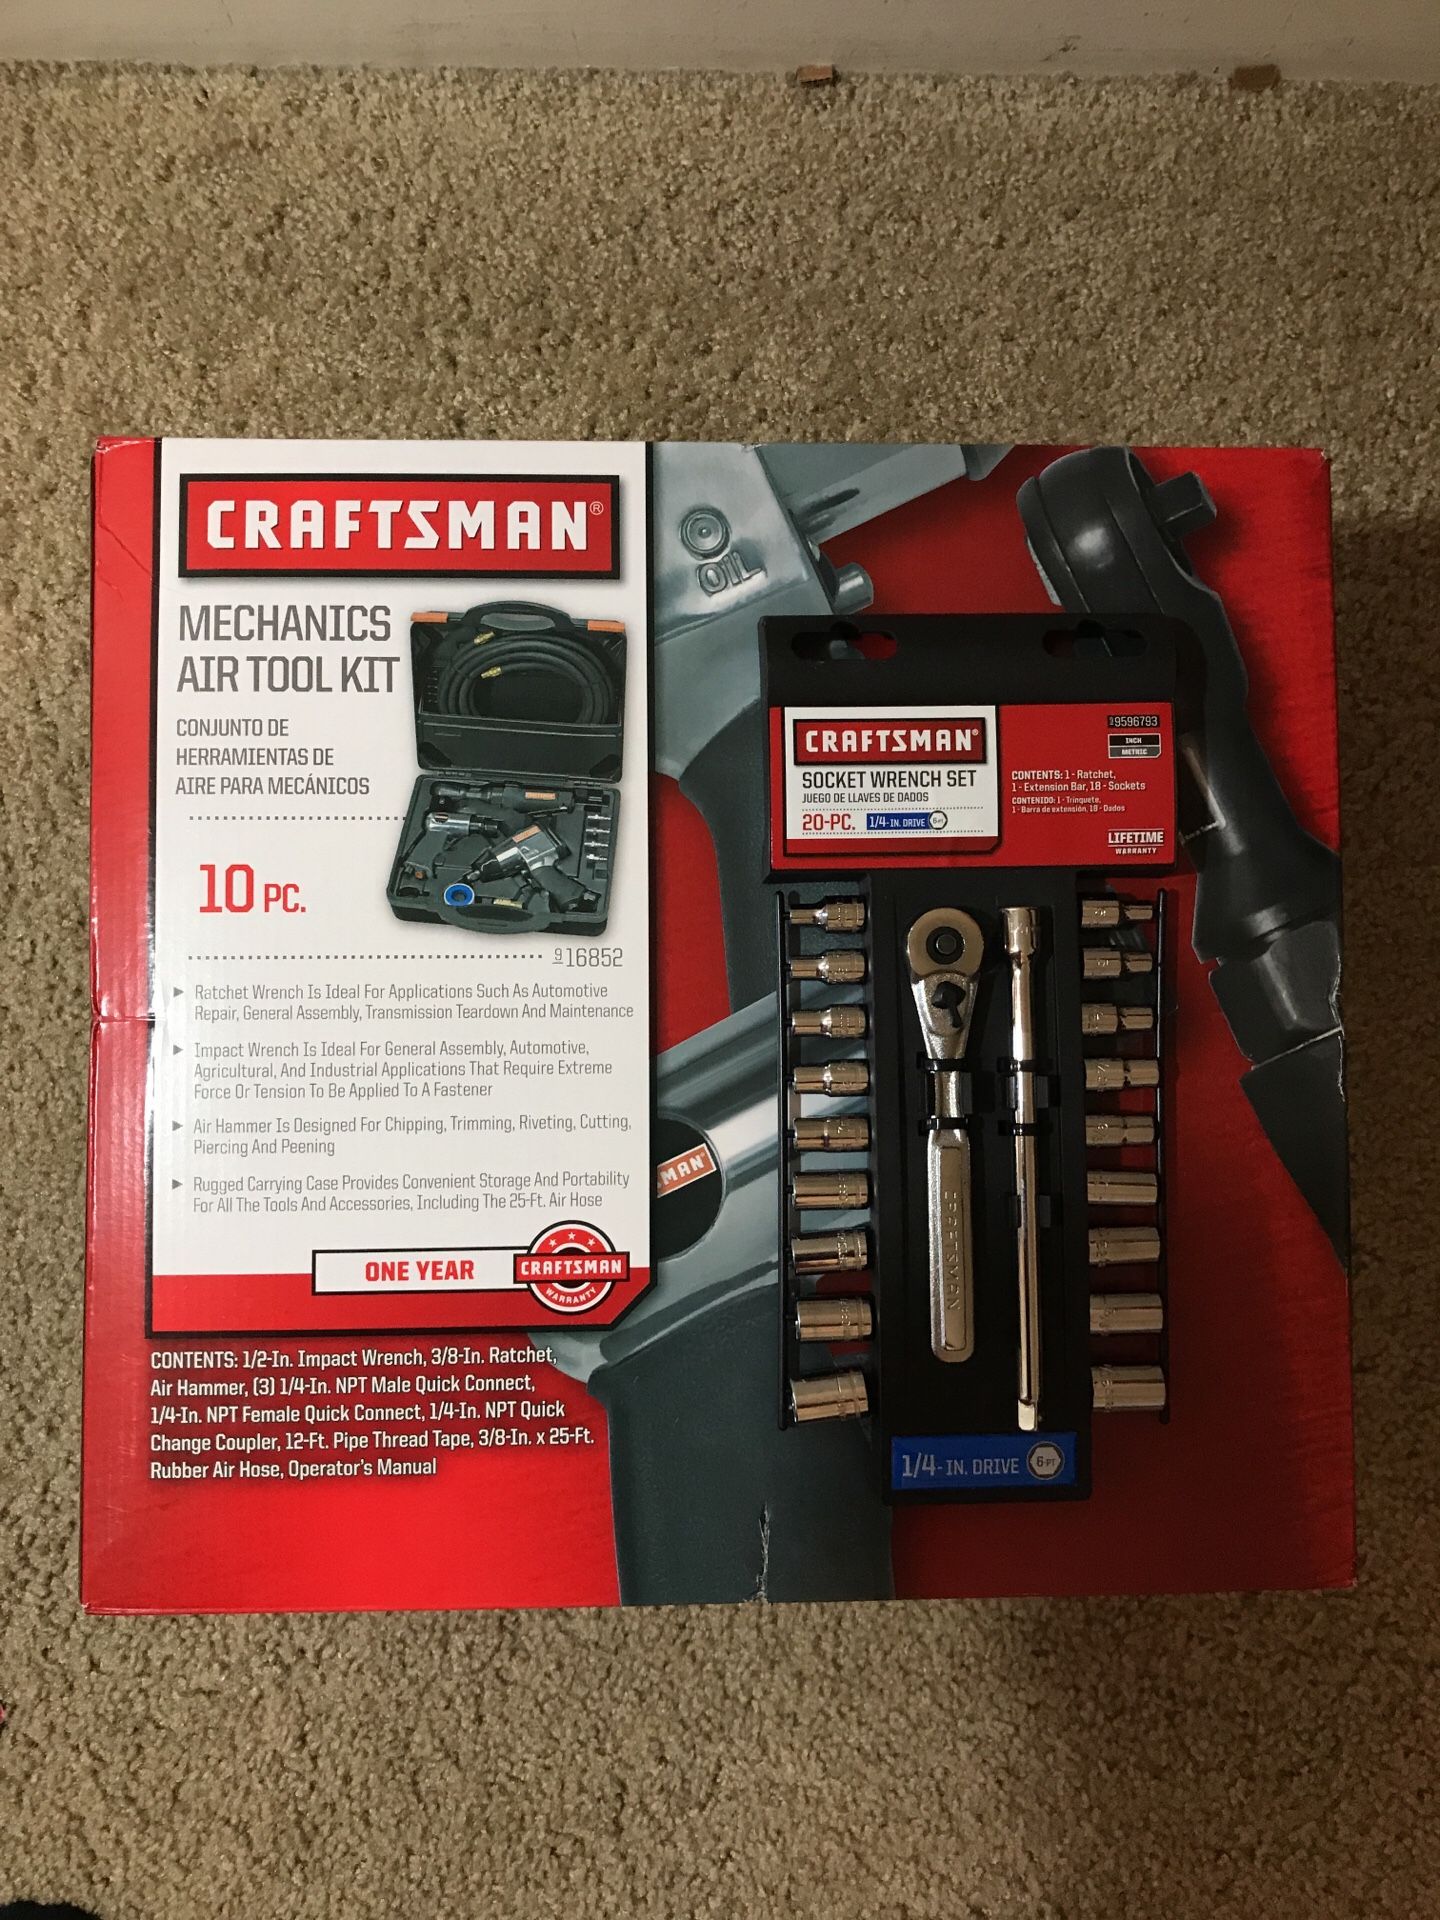 Craftsman Air tool kit 1pc and socket wrench set 20pc